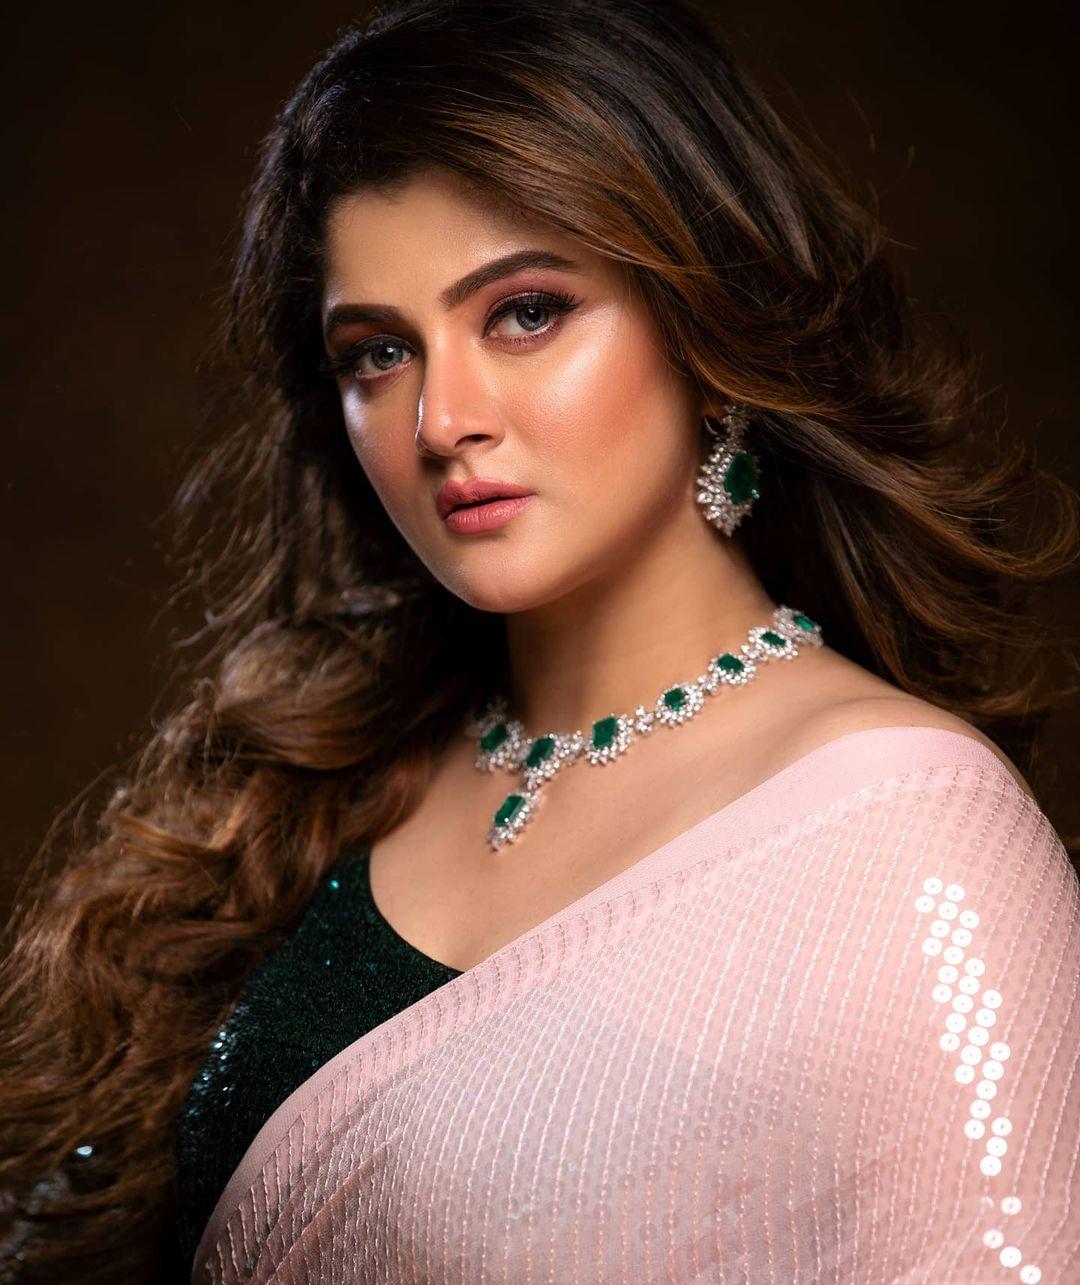 1080px x 1285px - Srabanti Chatterjee exposing hot and glamorous photos | Srabanti Chatterjee  exposing hot photos gallery Photos: HD Images, Pictures, Stills, First Look  Posters of Srabanti Chatterjee exposing hot and glamorous photos | Srabanti